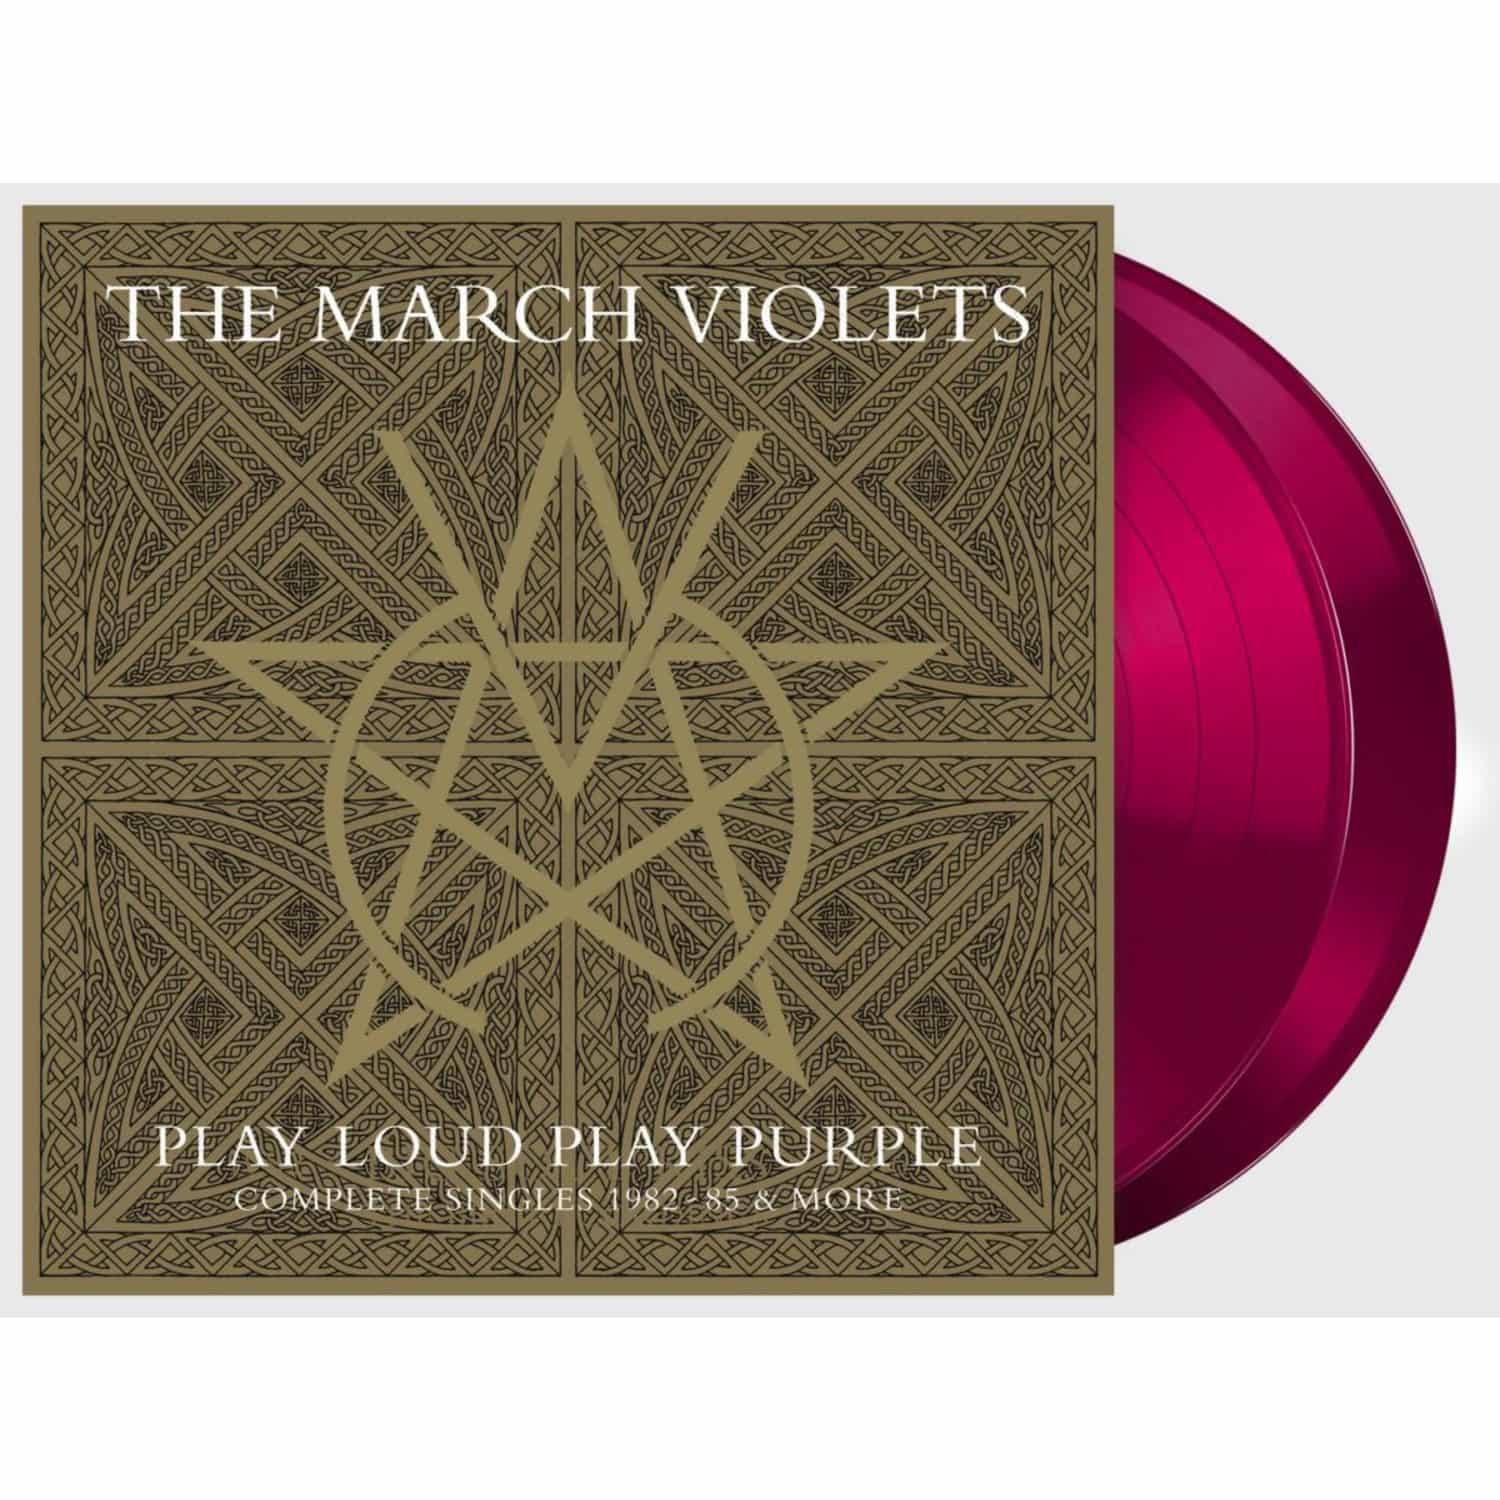 The March Violets - PLAY LOUD PLAY PURPLE 